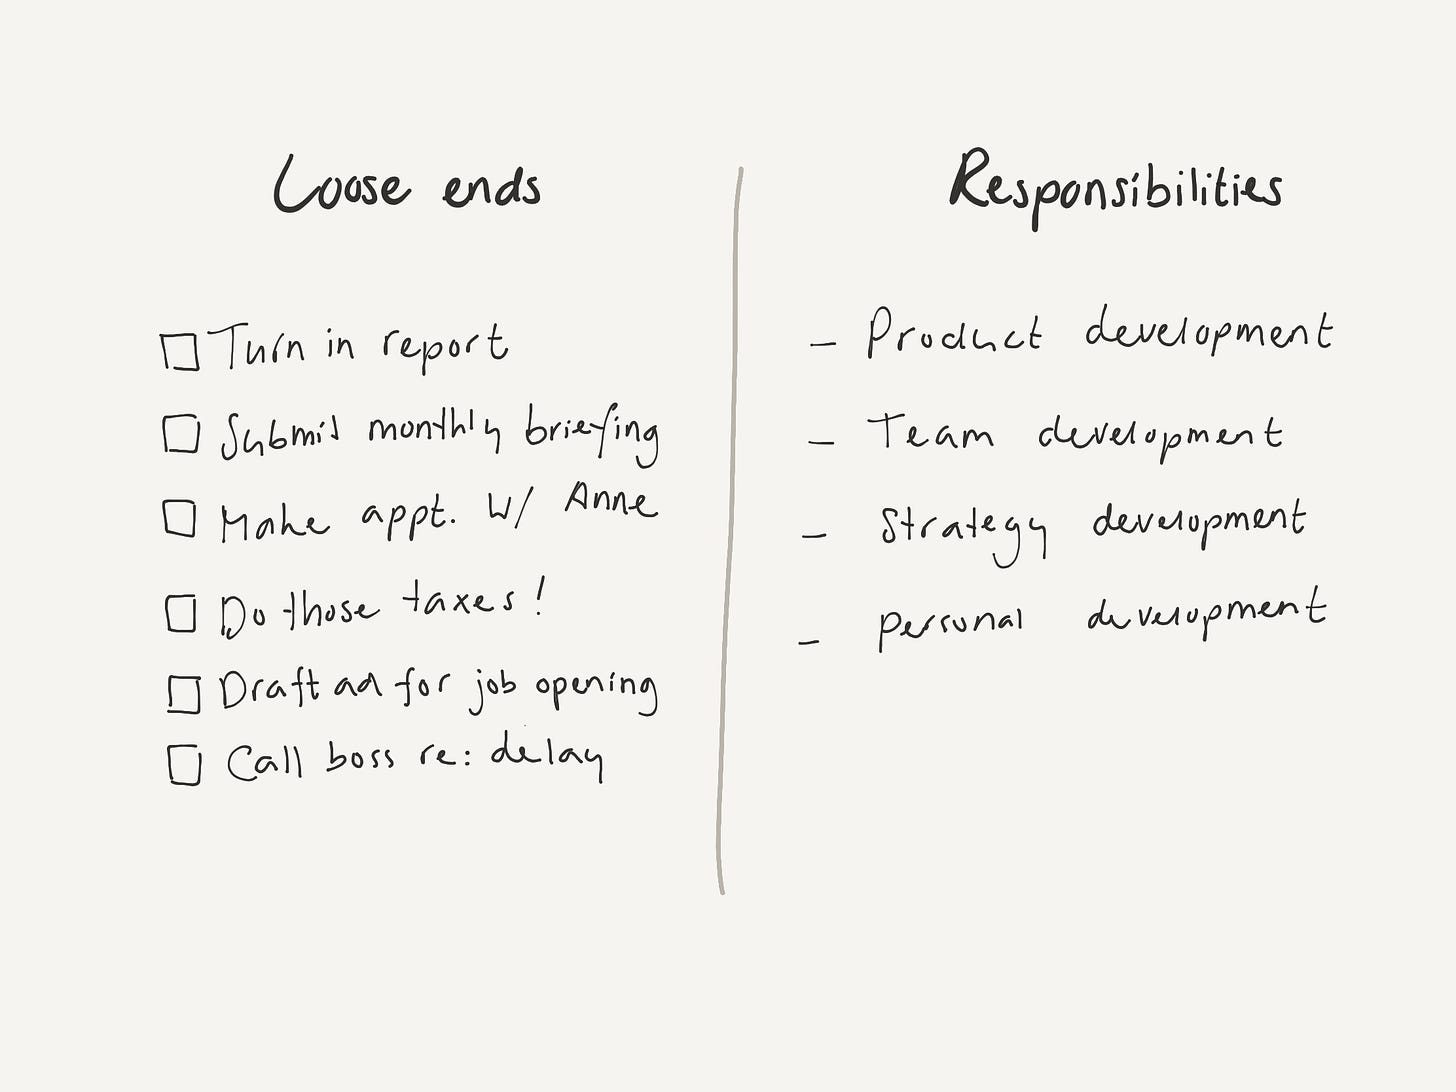 Urgent tasks on the left (sorry for making you think about taxes!), responsibilities on the right. Turns out it doesn’t look that bad.